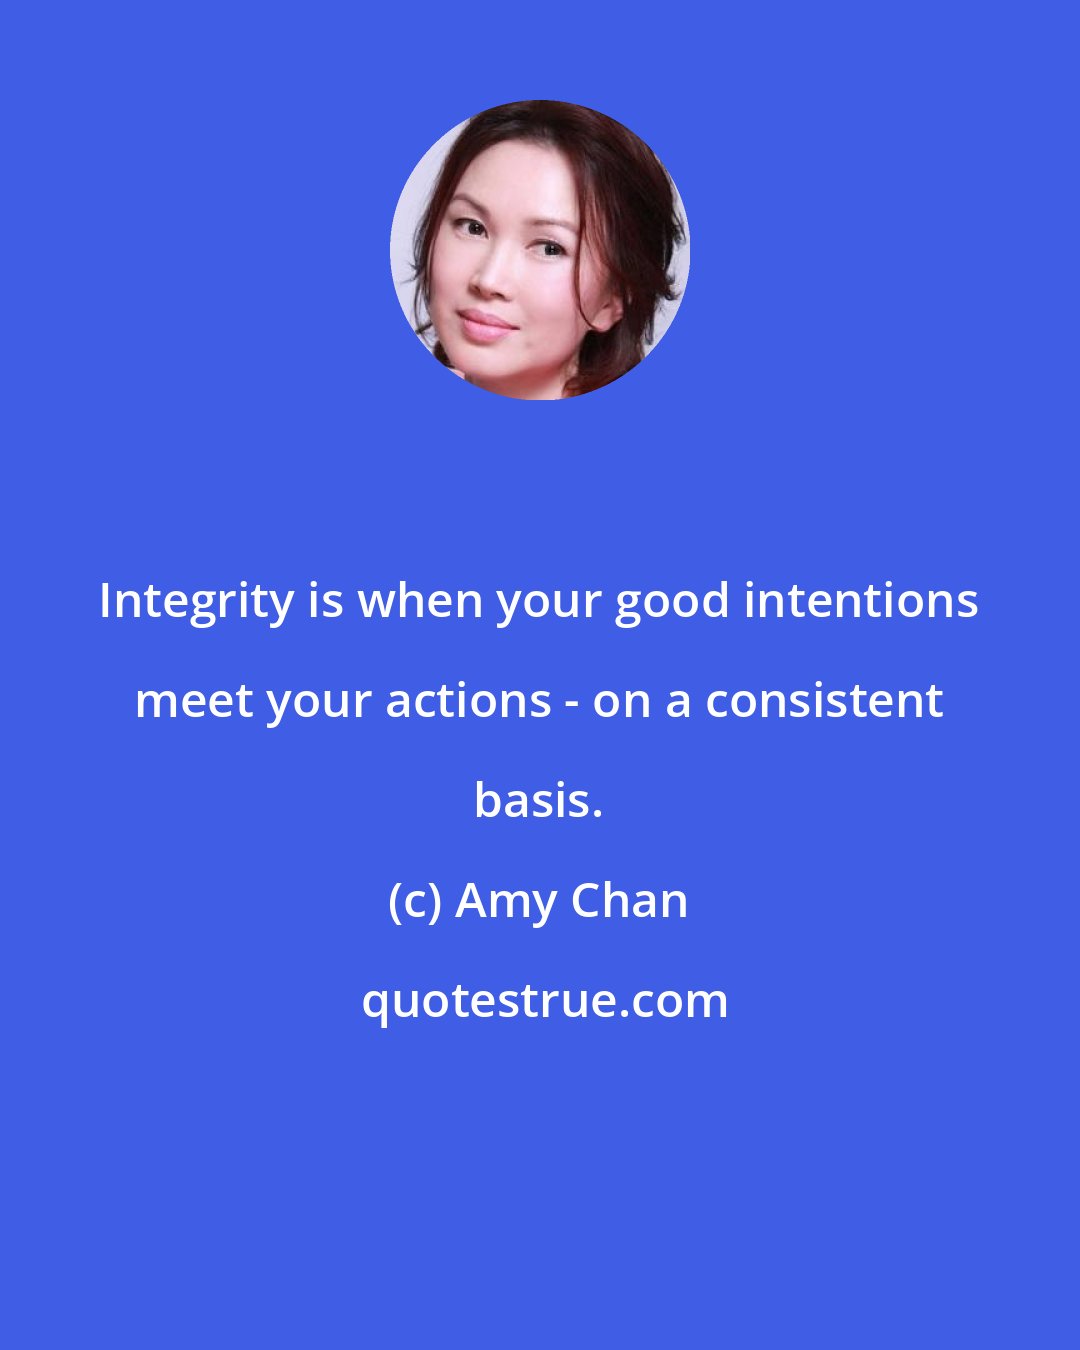 Amy Chan: Integrity is when your good intentions meet your actions - on a consistent basis.